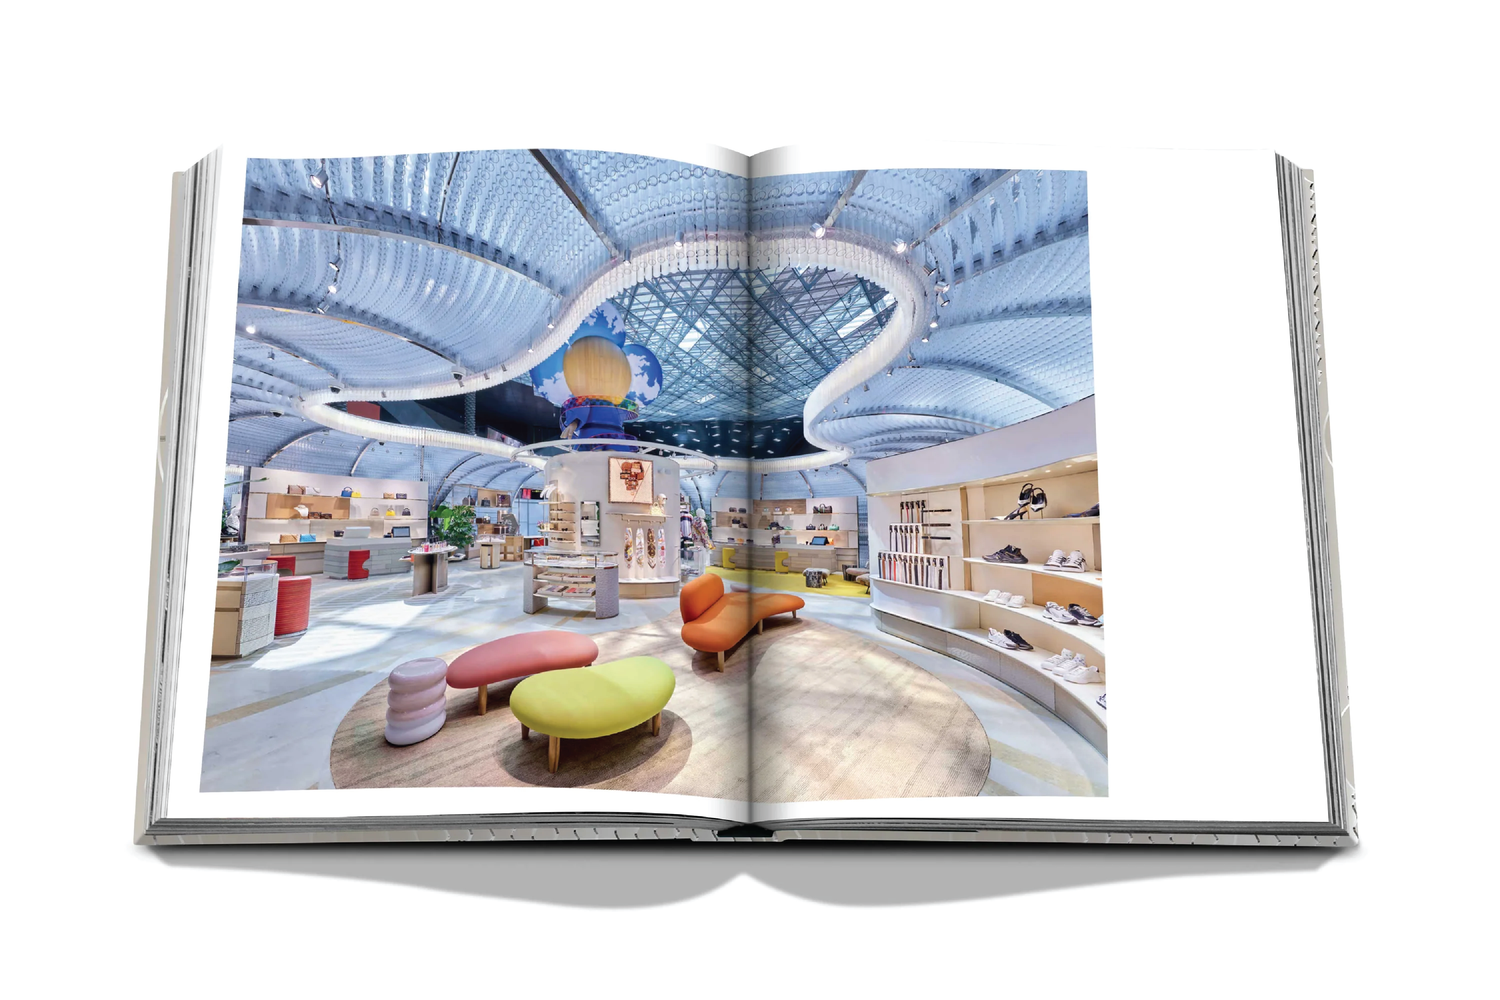 ASSOULINE Louis Vuitton Skin: Architecture of Luxury (New York City Ed –  Wynn at Home